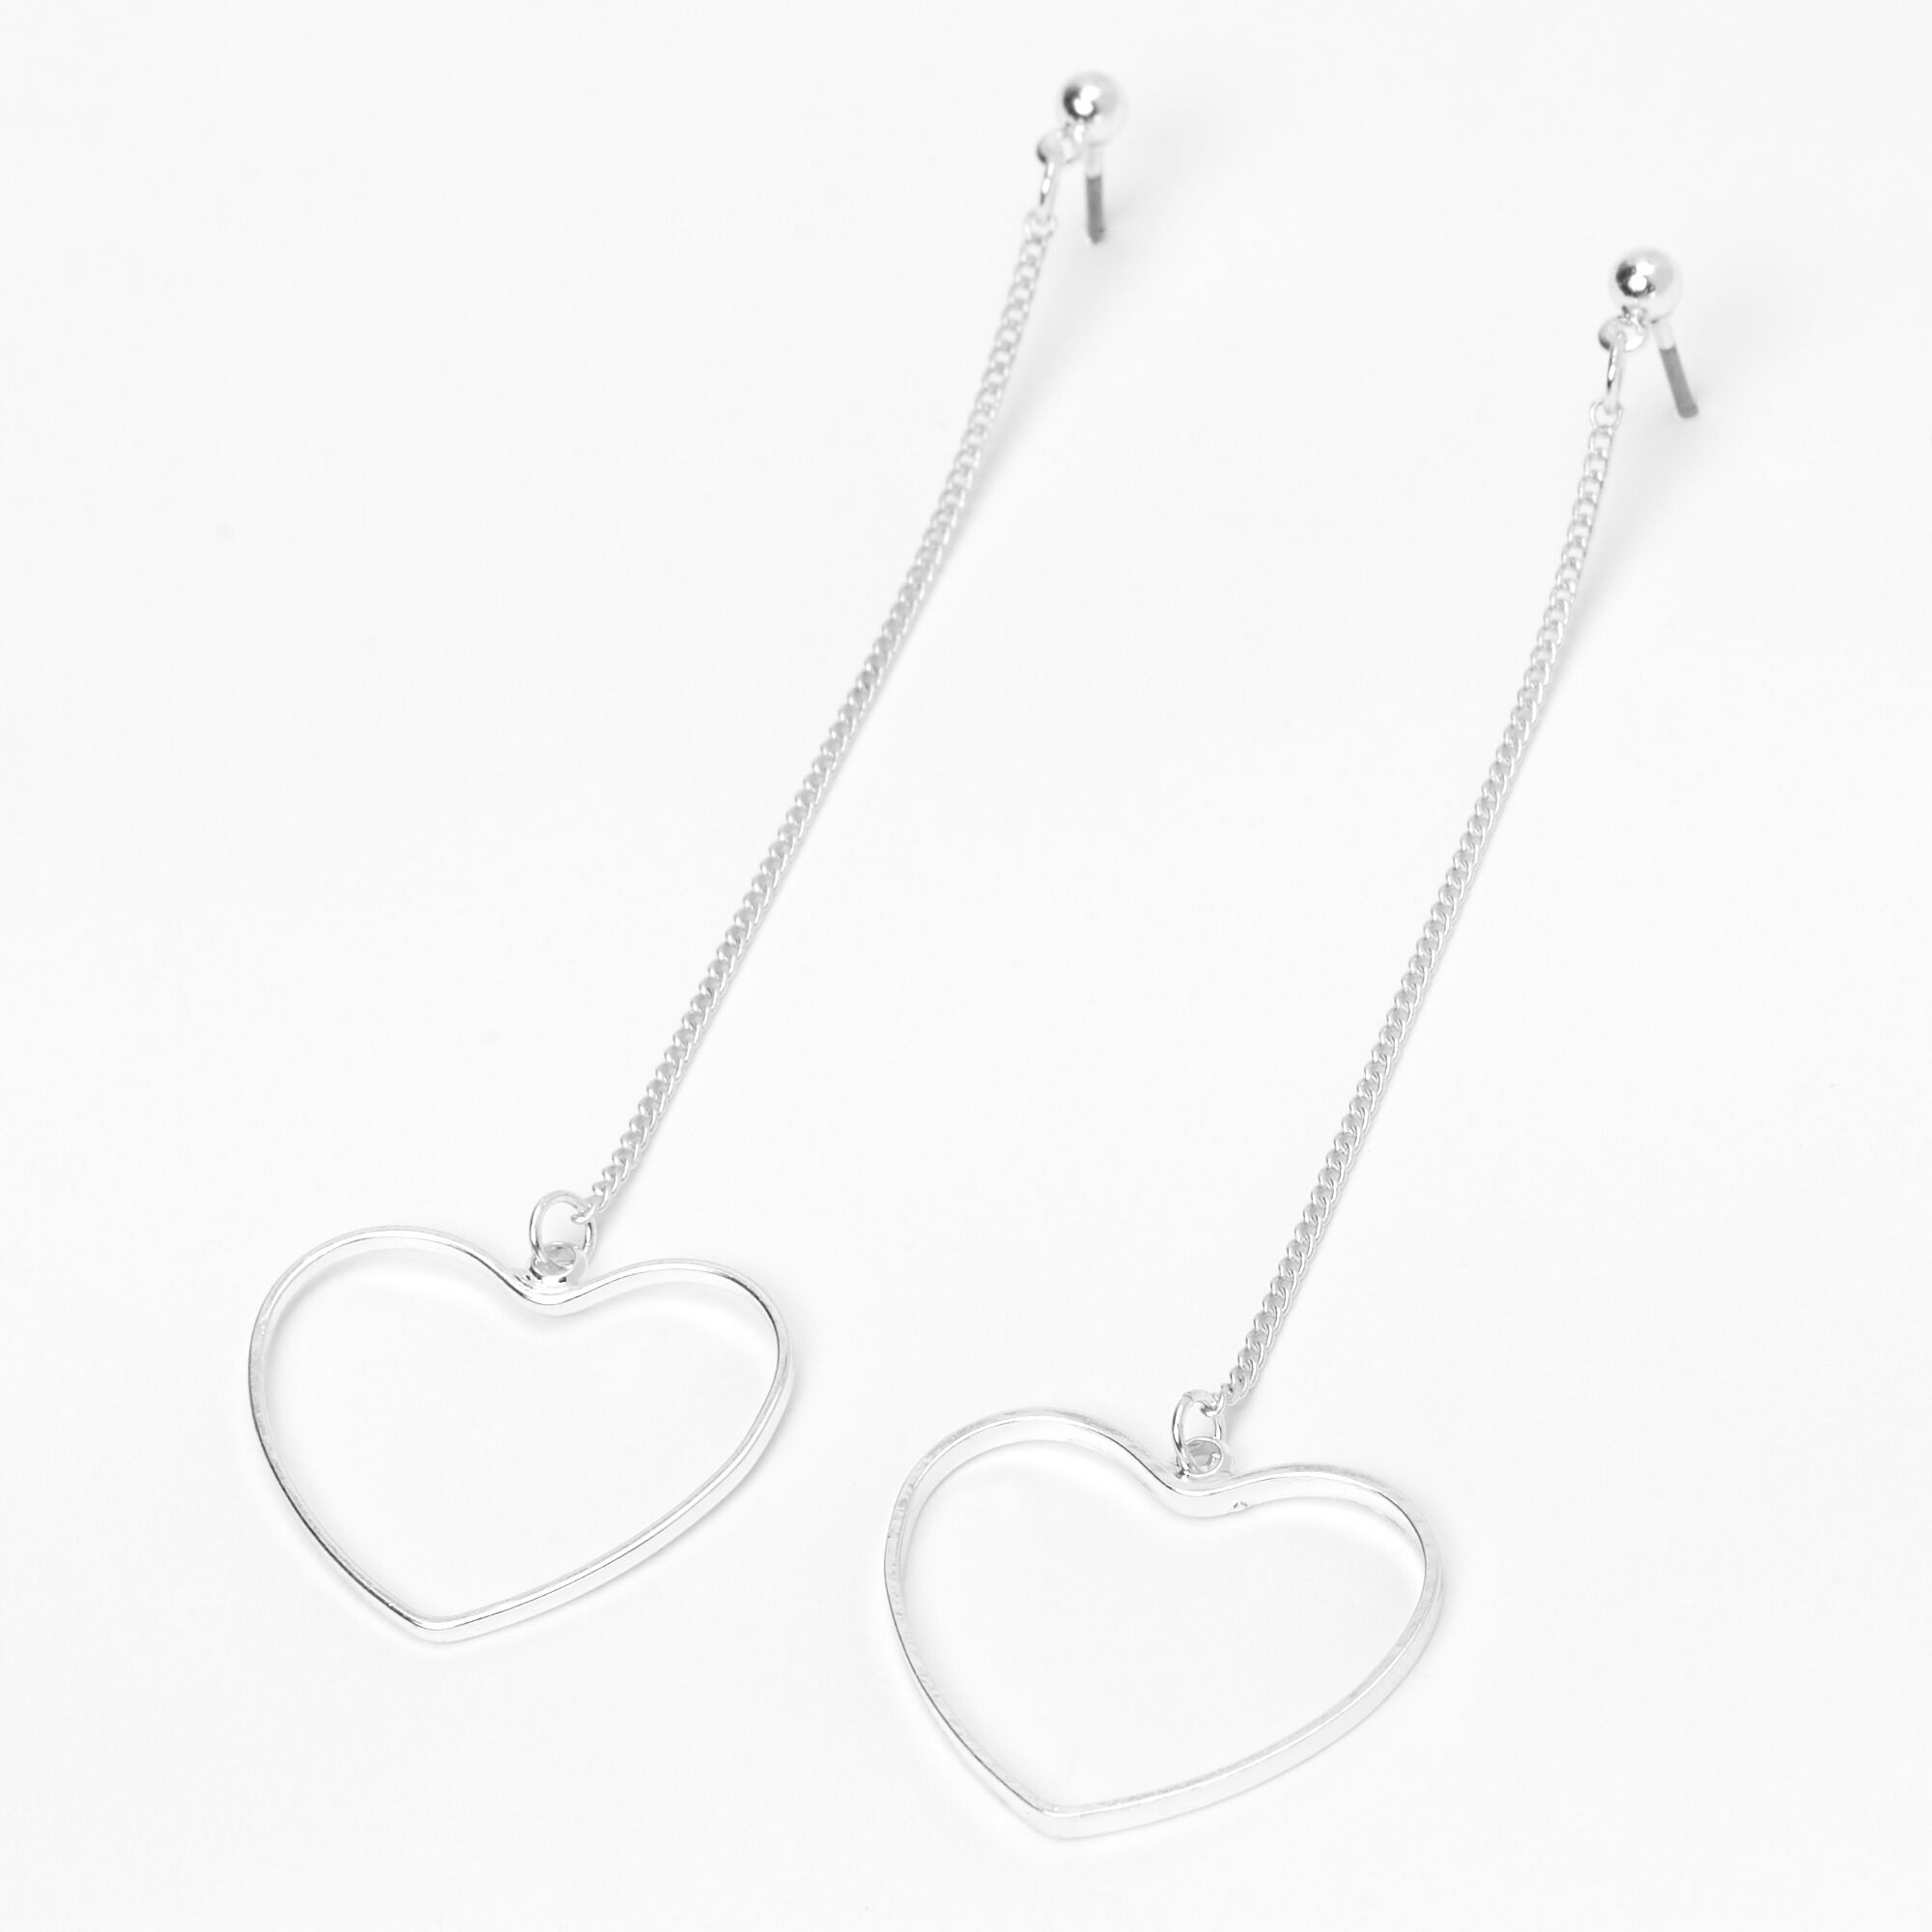 View Claires Tone 3 Open Heart Linear Drop Earrings Silver information